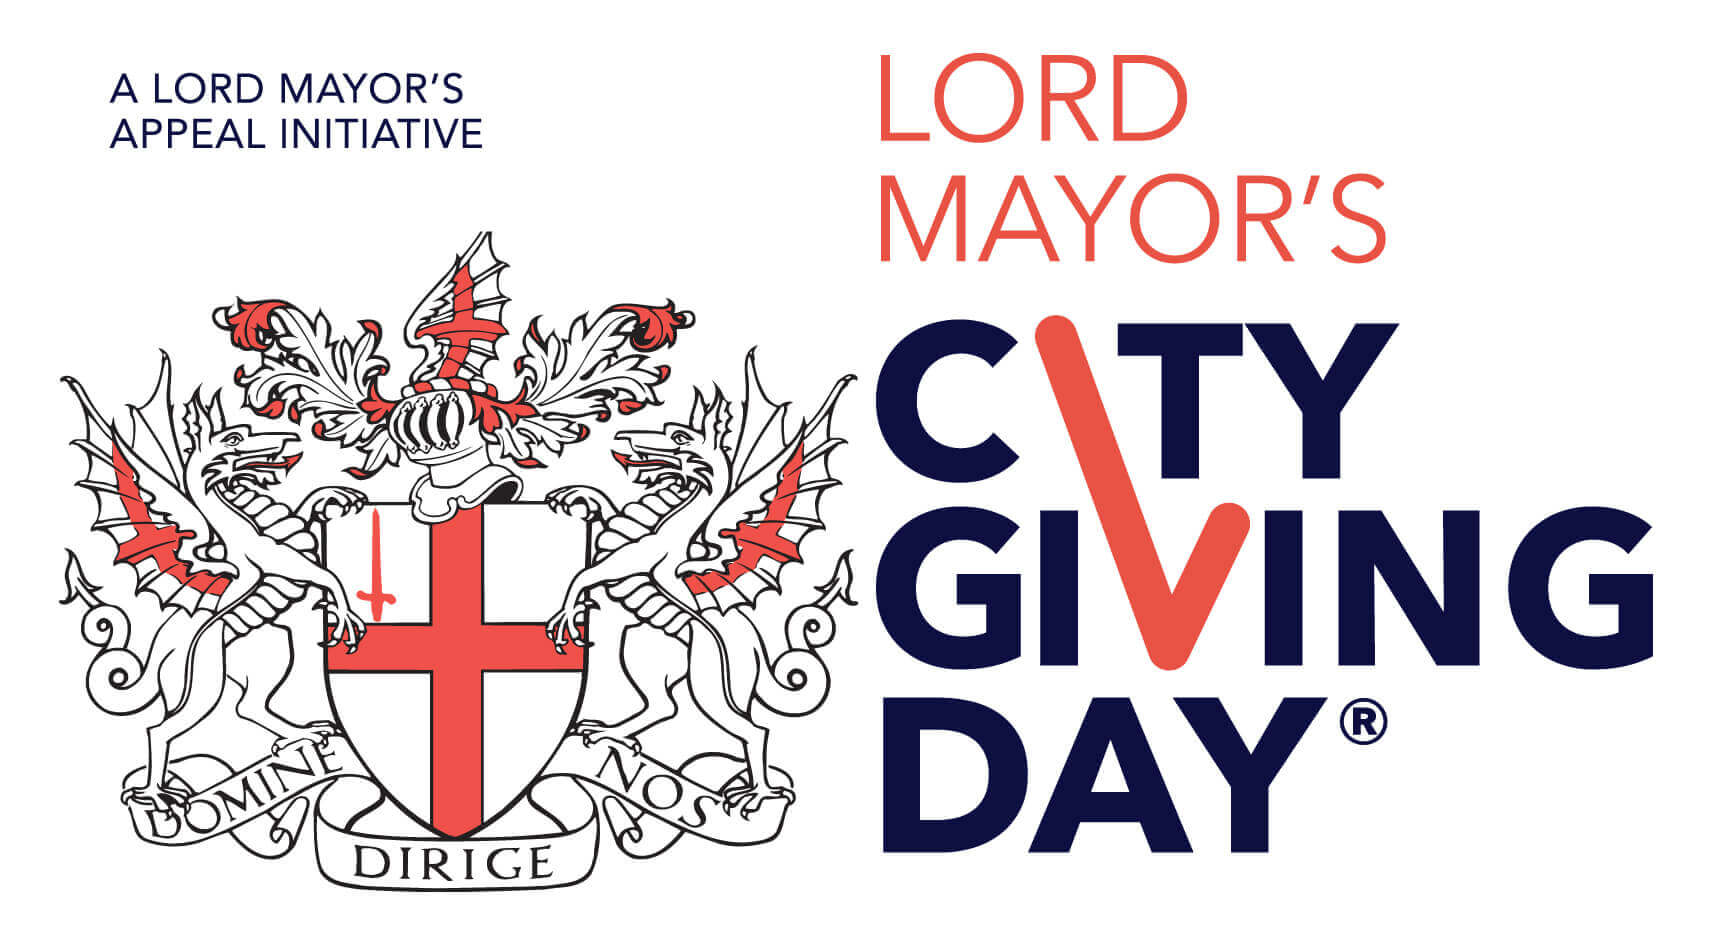 Centrus London office to join City Giving Day this September